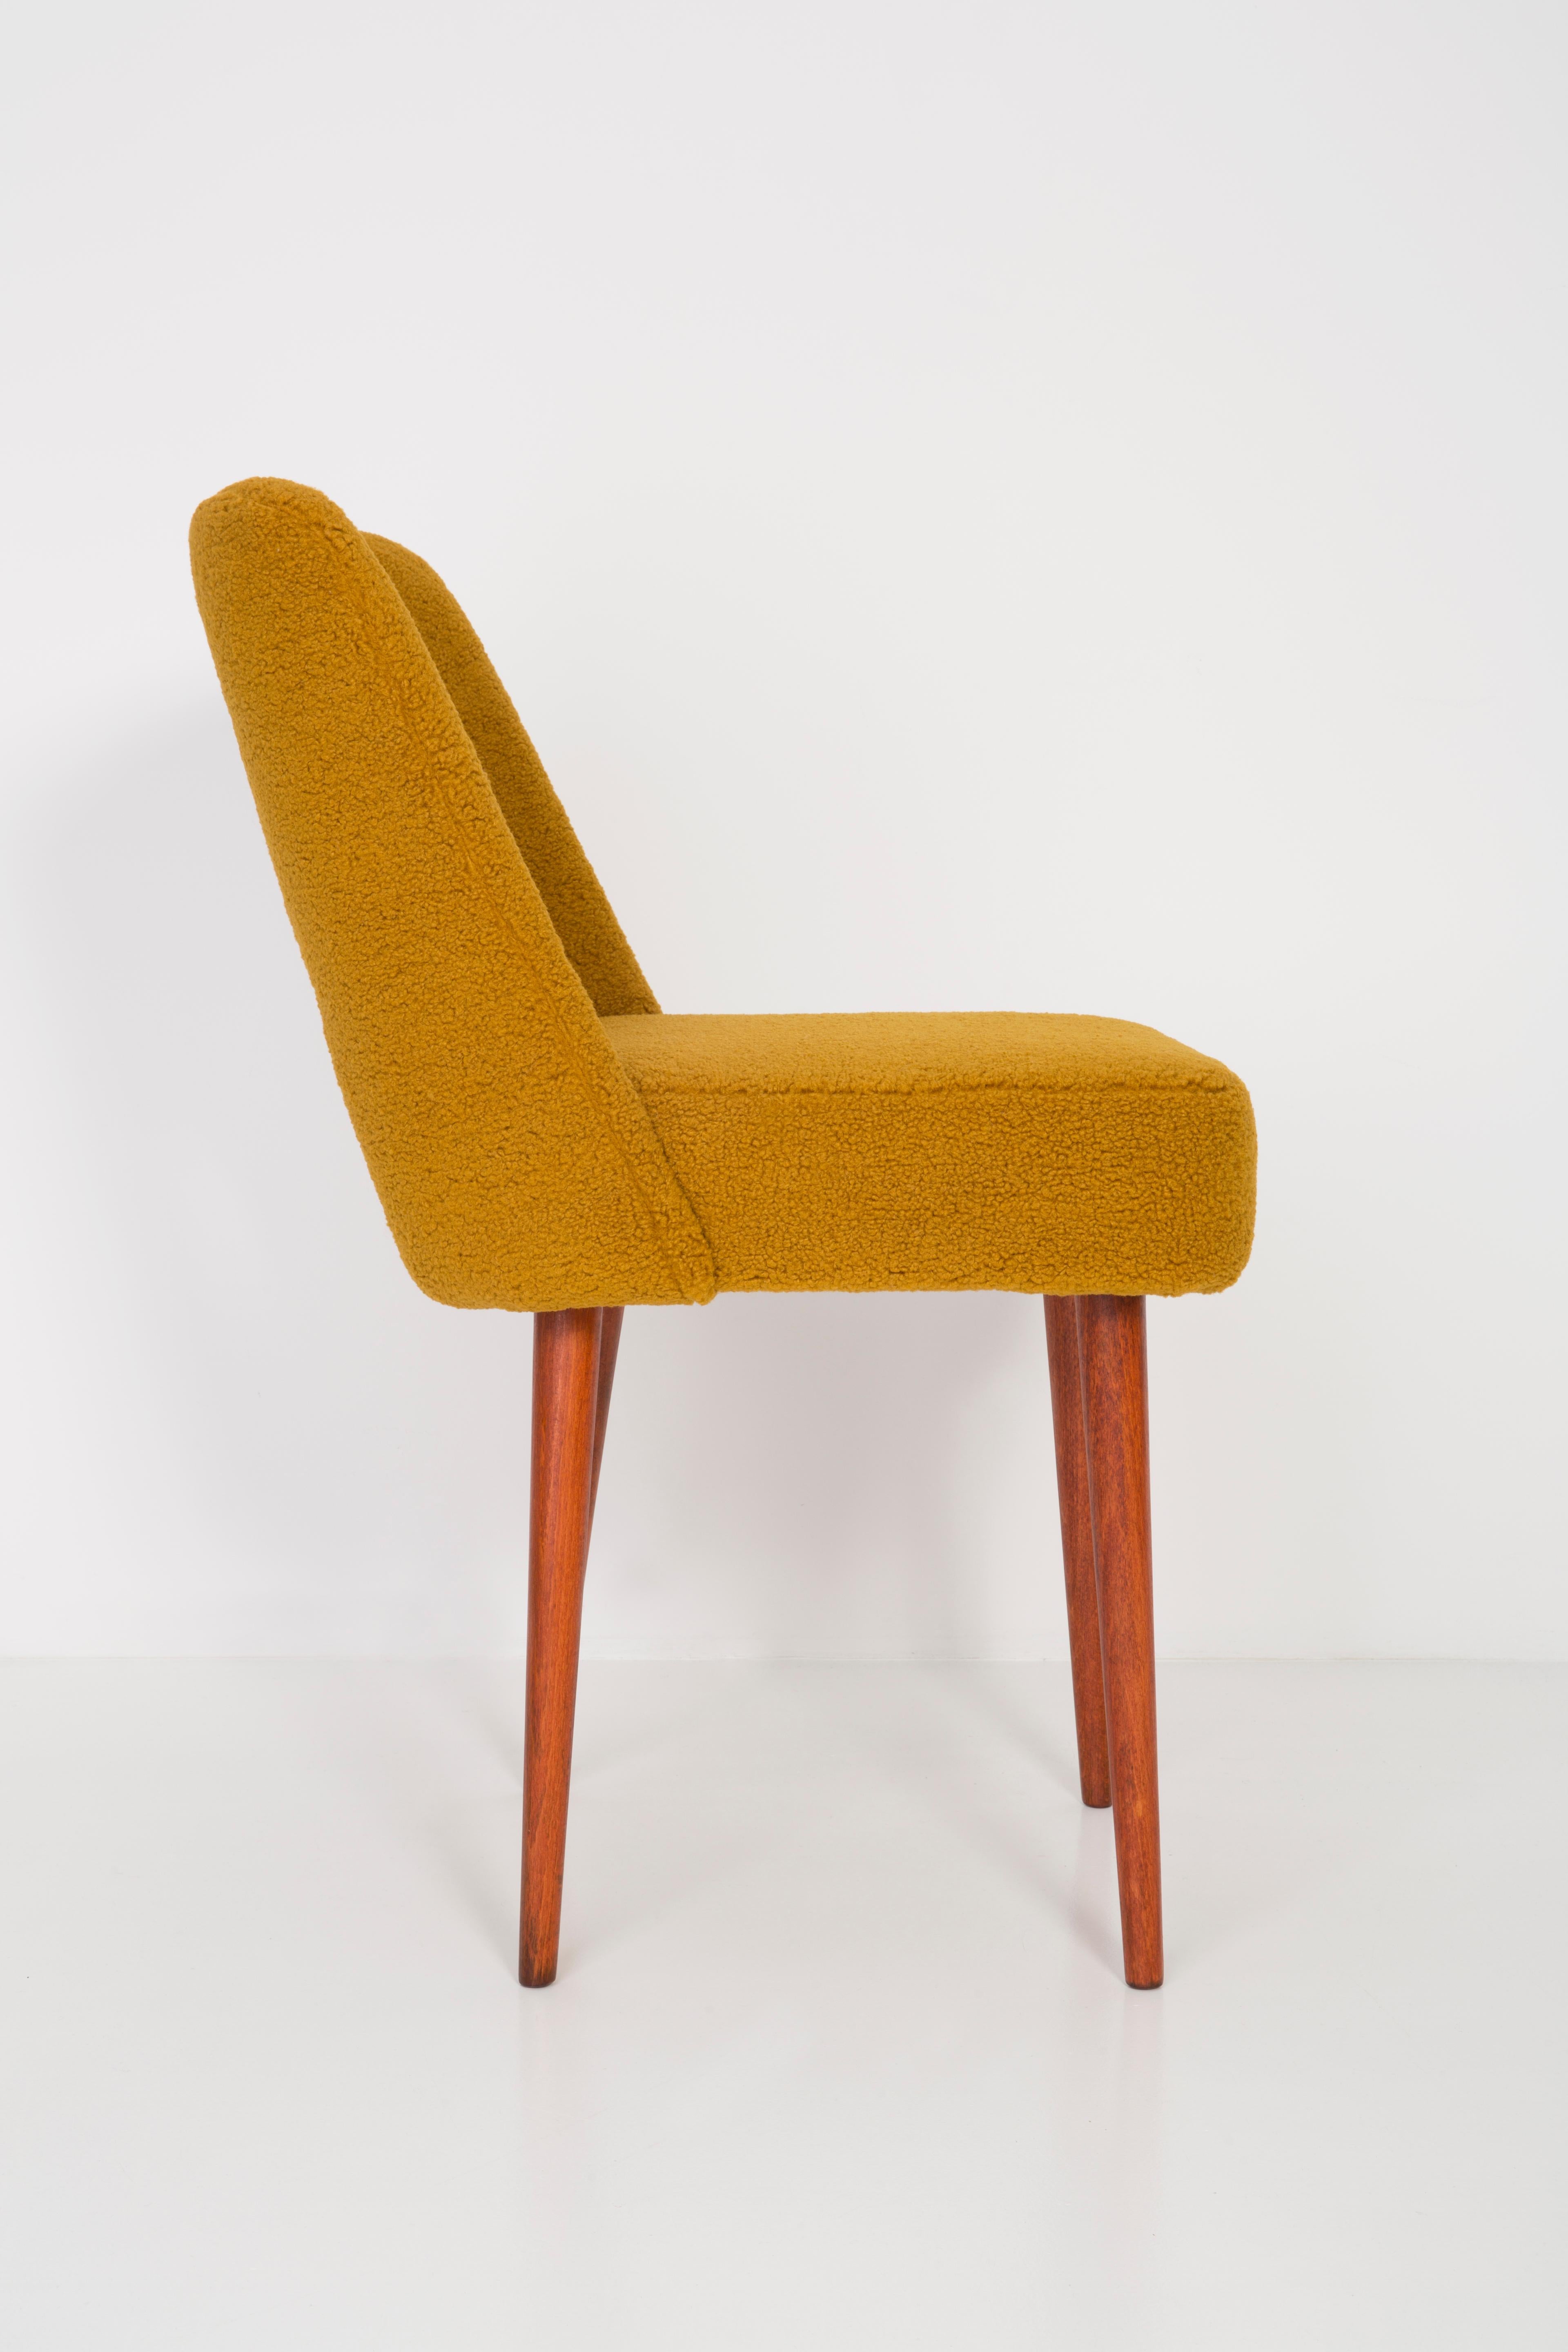 Set of Two Yellow Ochre Boucle 'Shell' Chairs, 1960s For Sale 2